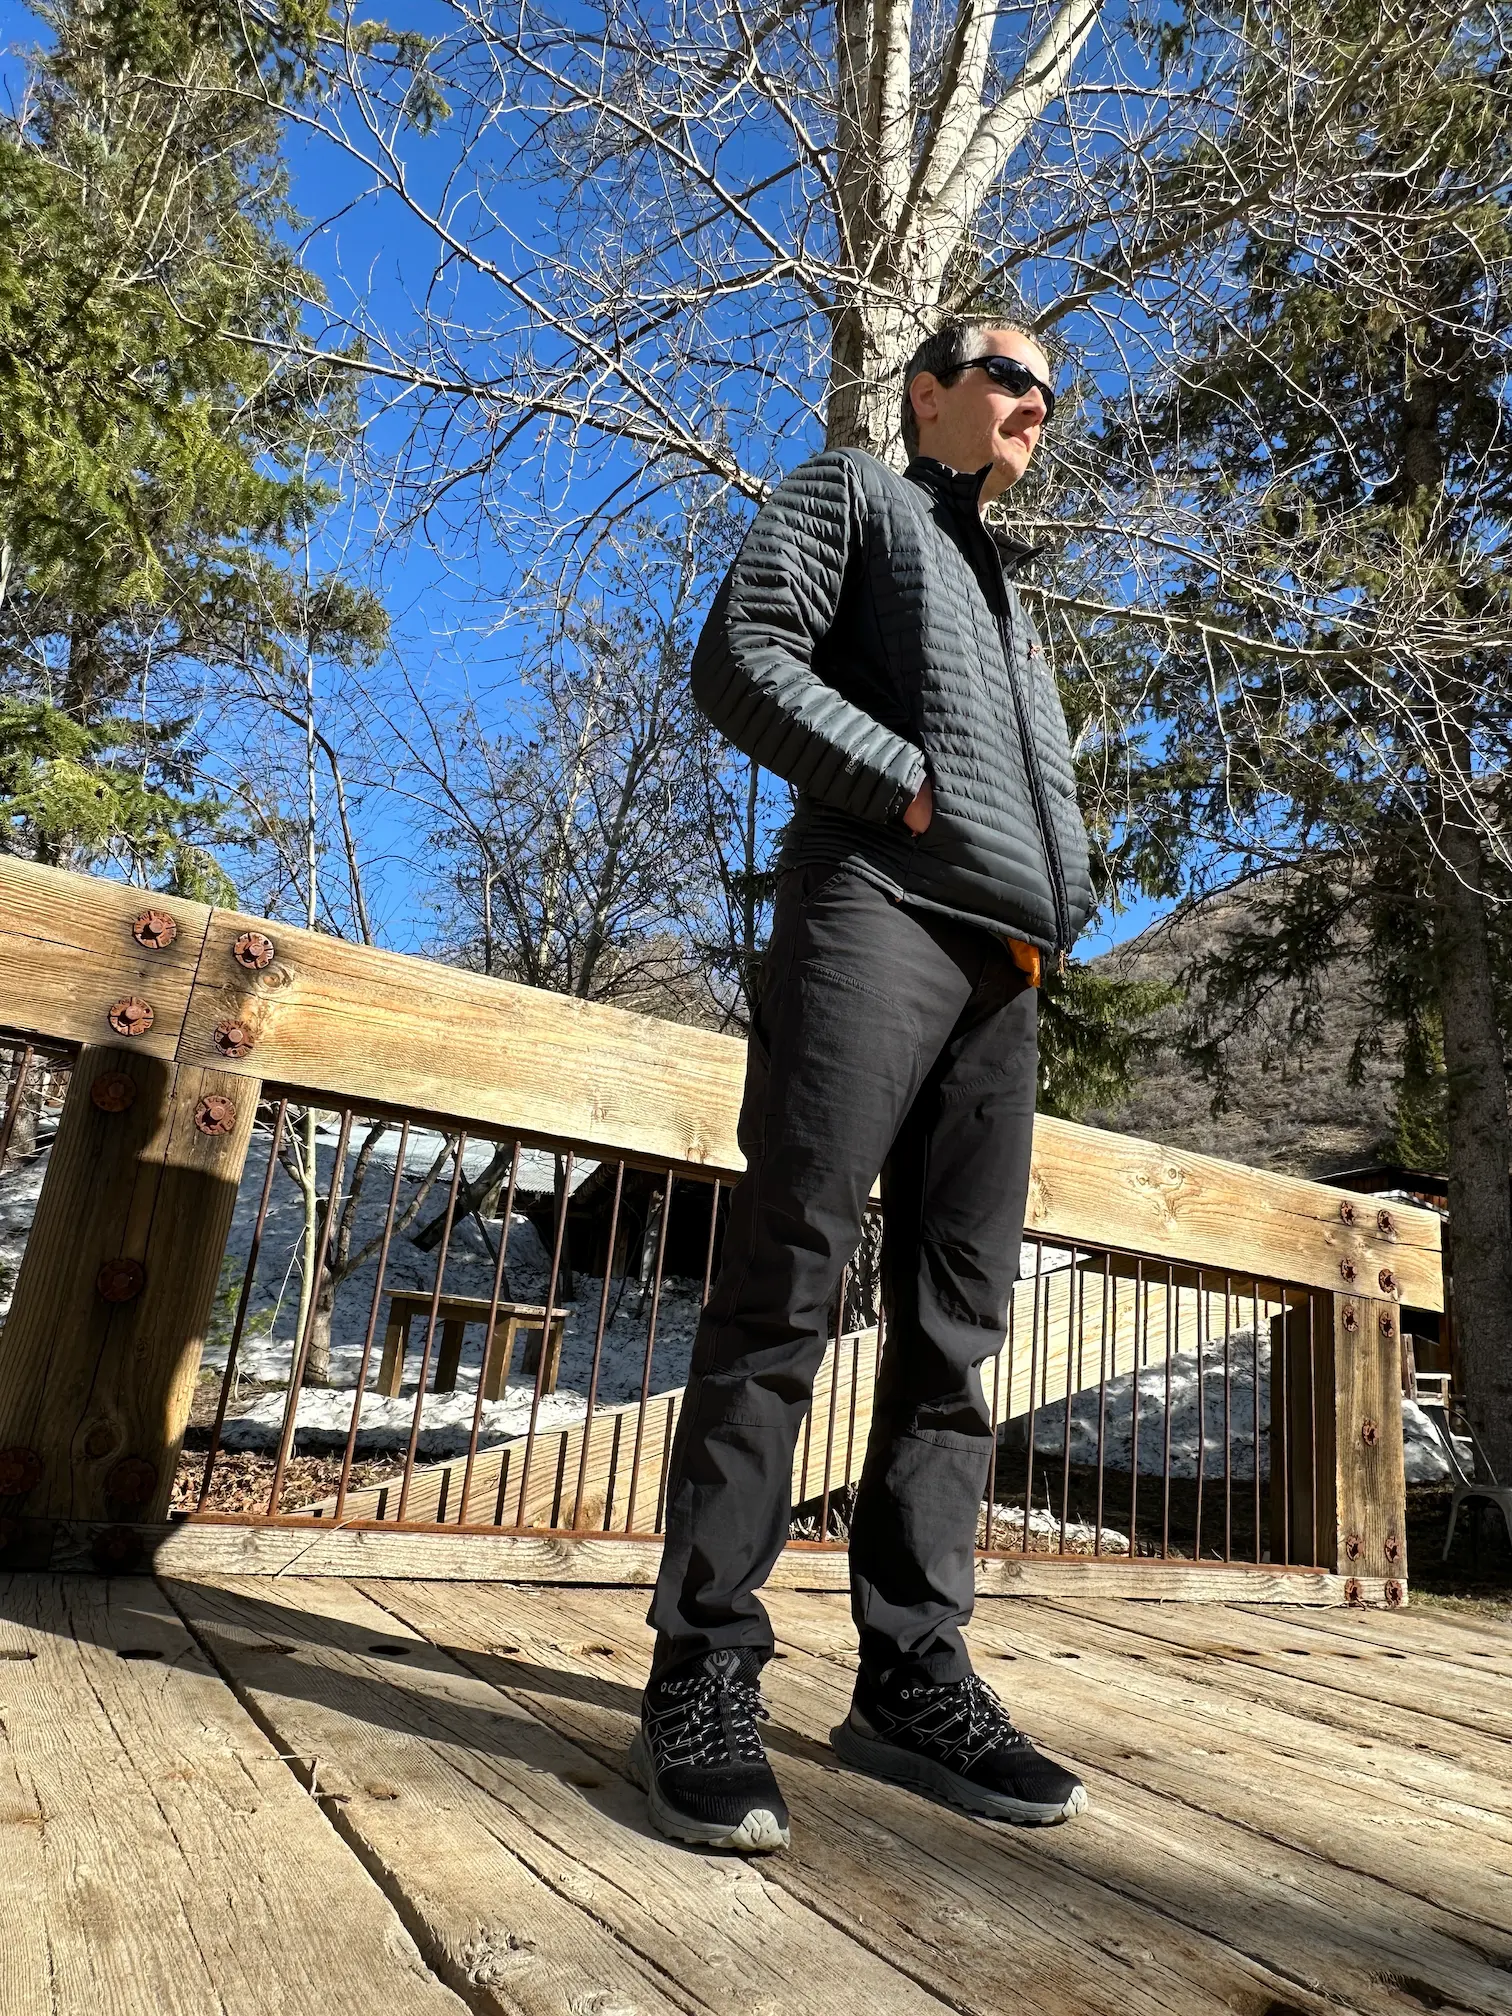 Keith is enjoying the scenery at Sundance Mountain Resort while wearing his new KÜHL pants.